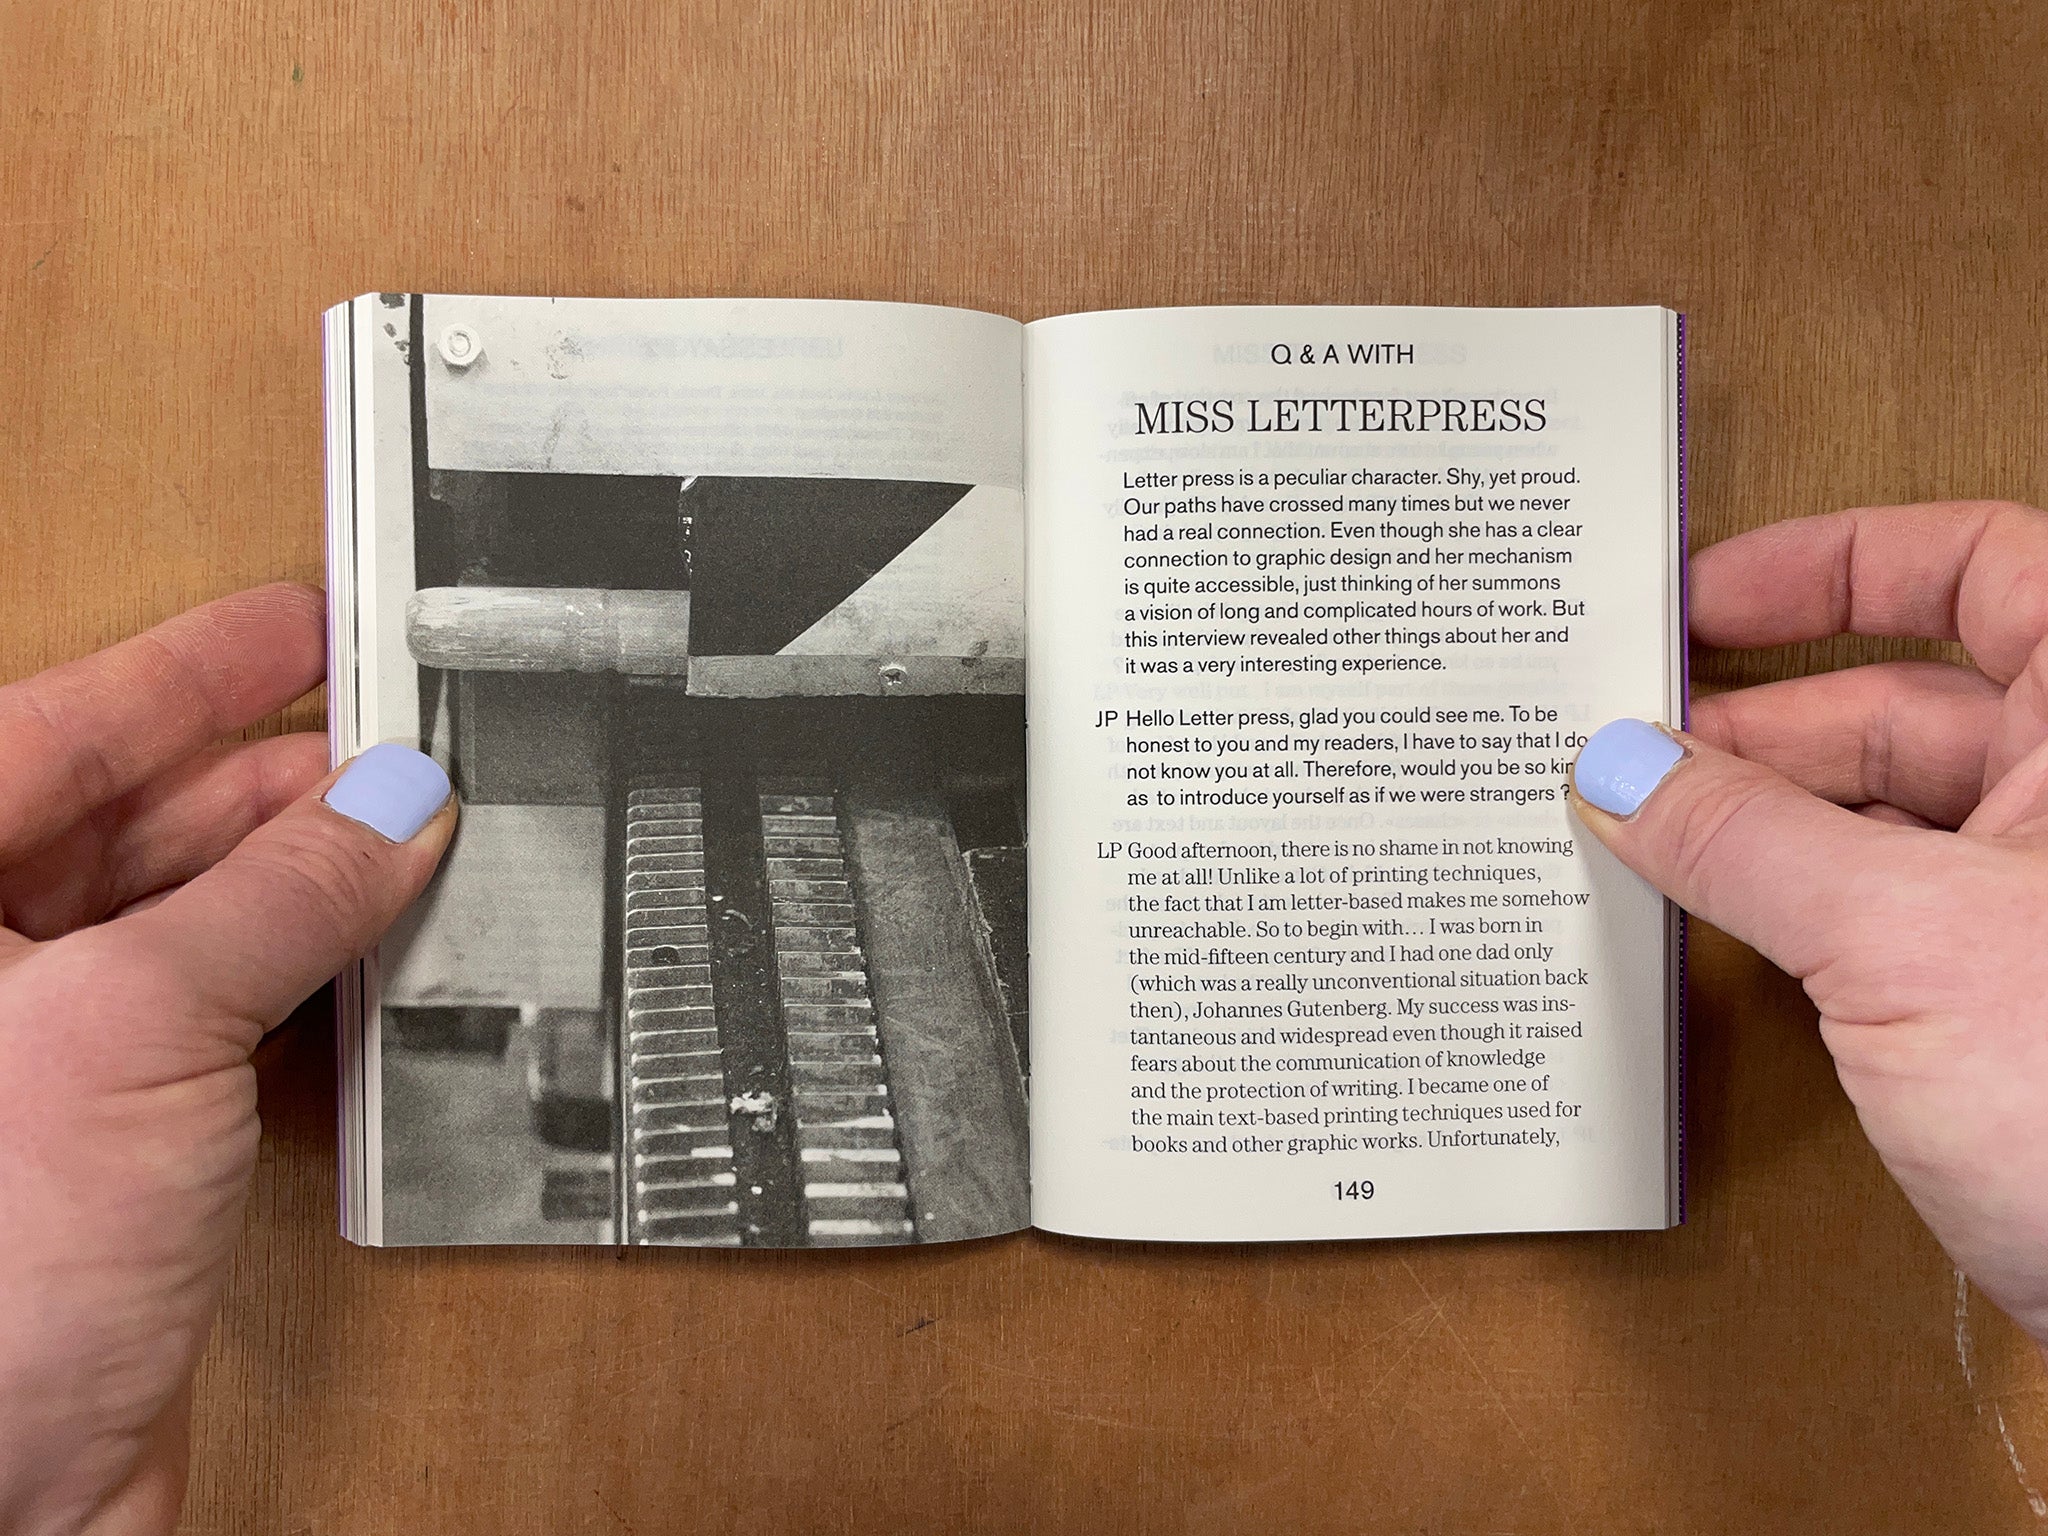 CAN YOU FEEL IT? EFFECTUATING TACTILITY AND PRINT IN THE CONTEMPORARY Ed. by Freek Lomme